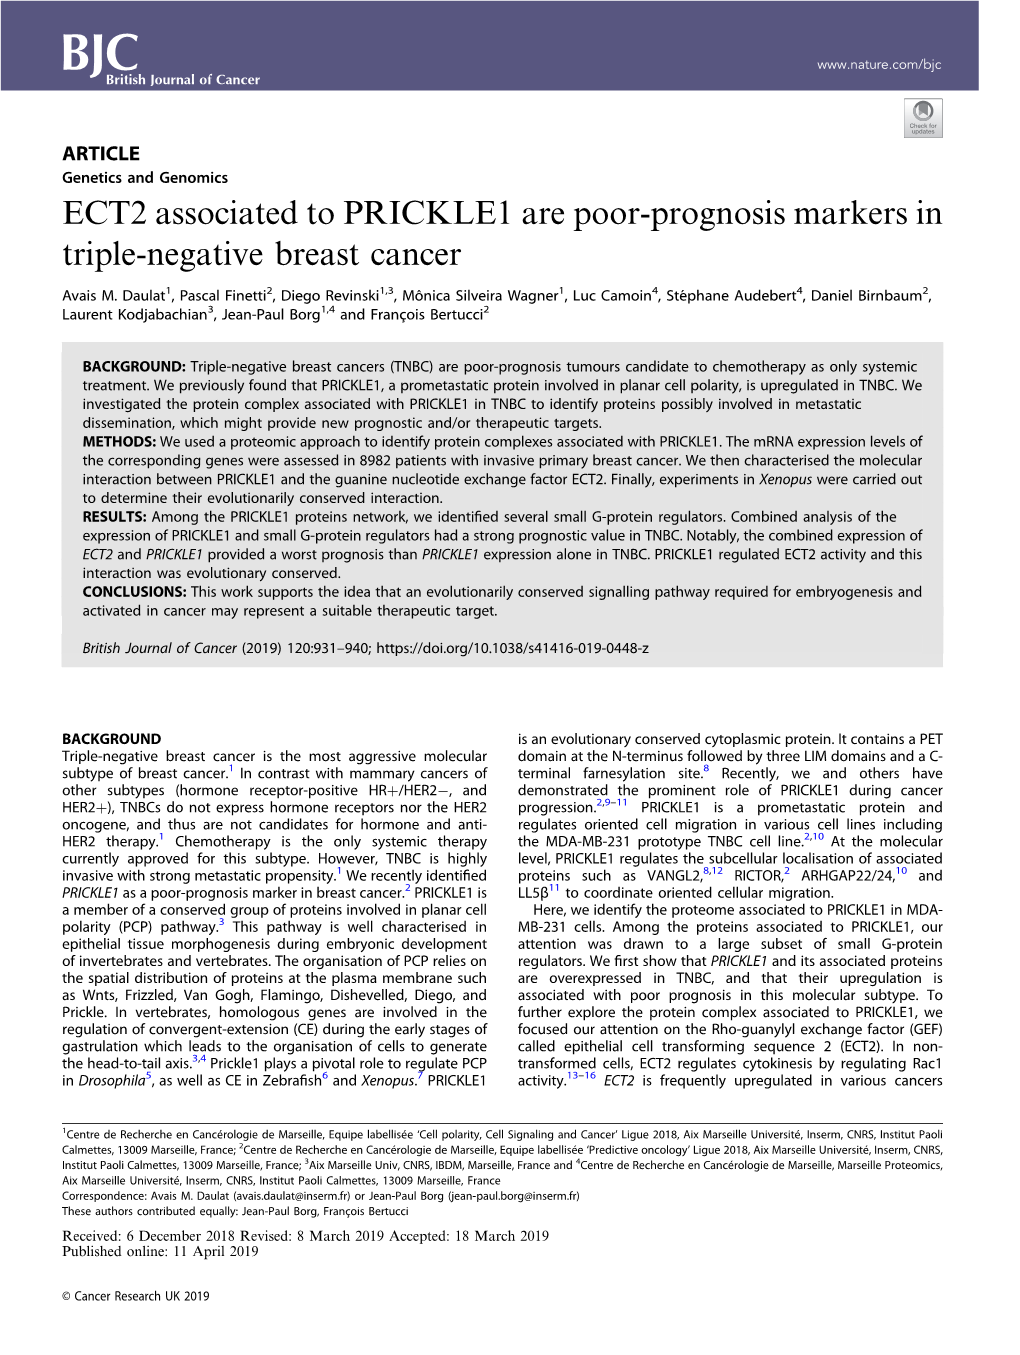 ECT2 Associated to PRICKLE1 Are Poor-Prognosis Markers in Triple-Negative Breast Cancer